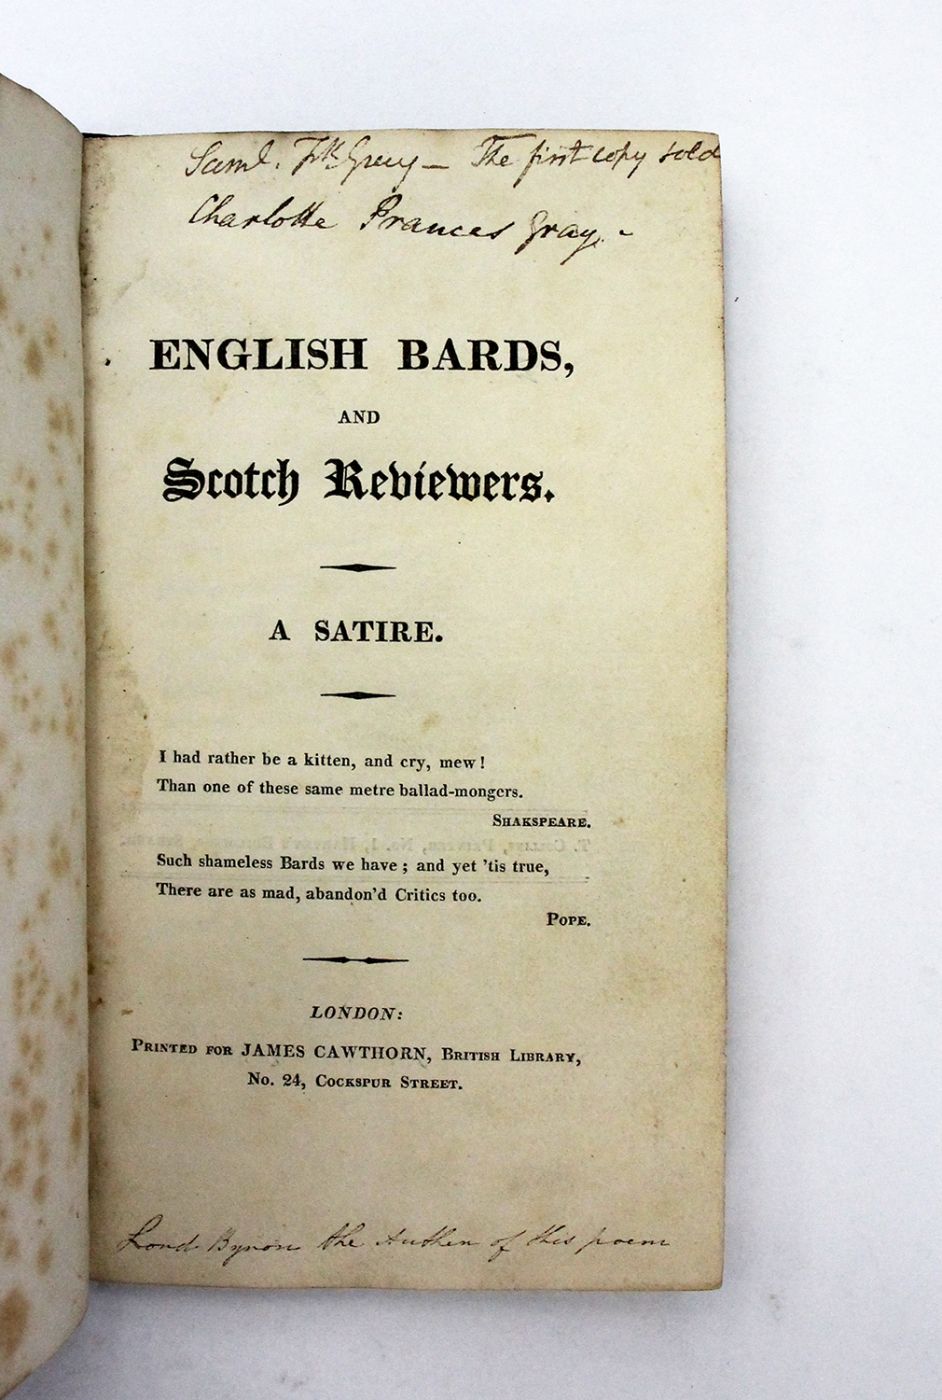 ENGLISH BARDS, AND SCOTCH REVIEWERS. A SATIRE. ['THE FIRST COPY SOLD']. -  image 2